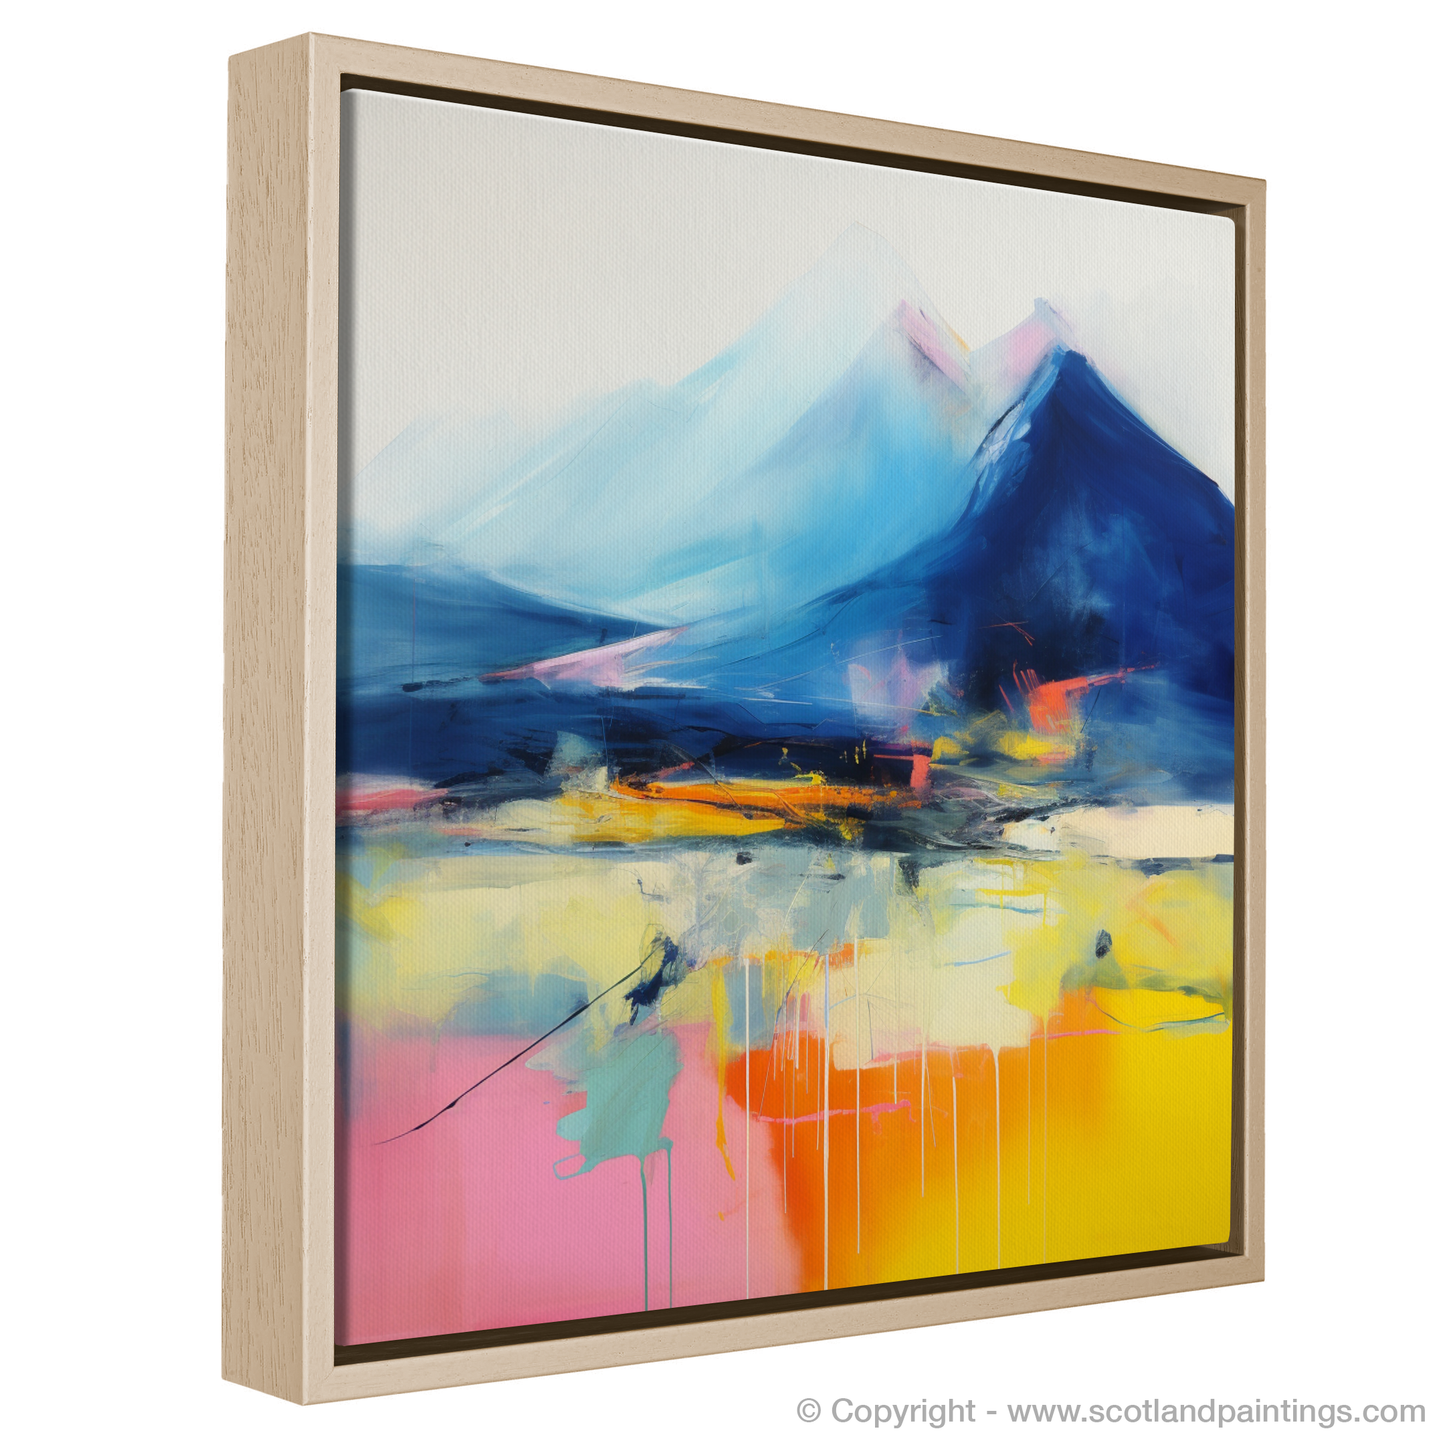 Painting and Art Print of Beinn Narnain entitled "Majestic Beinn Narnain: An Abstract Highland Symphony".